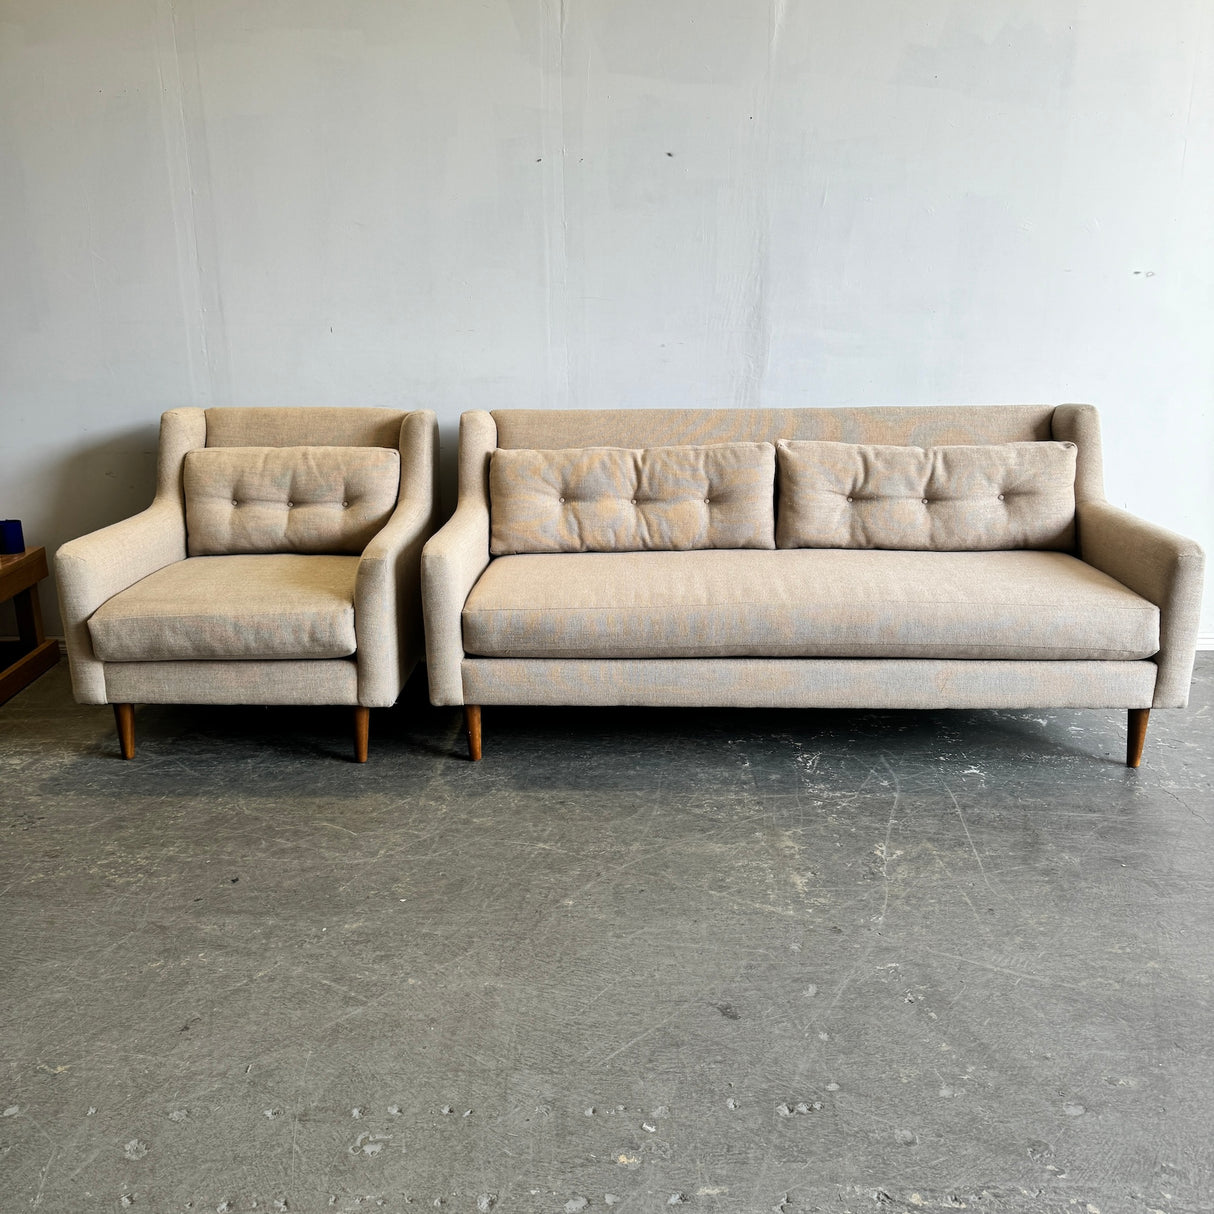 West Elm Crosby Sofa and lounge chair set